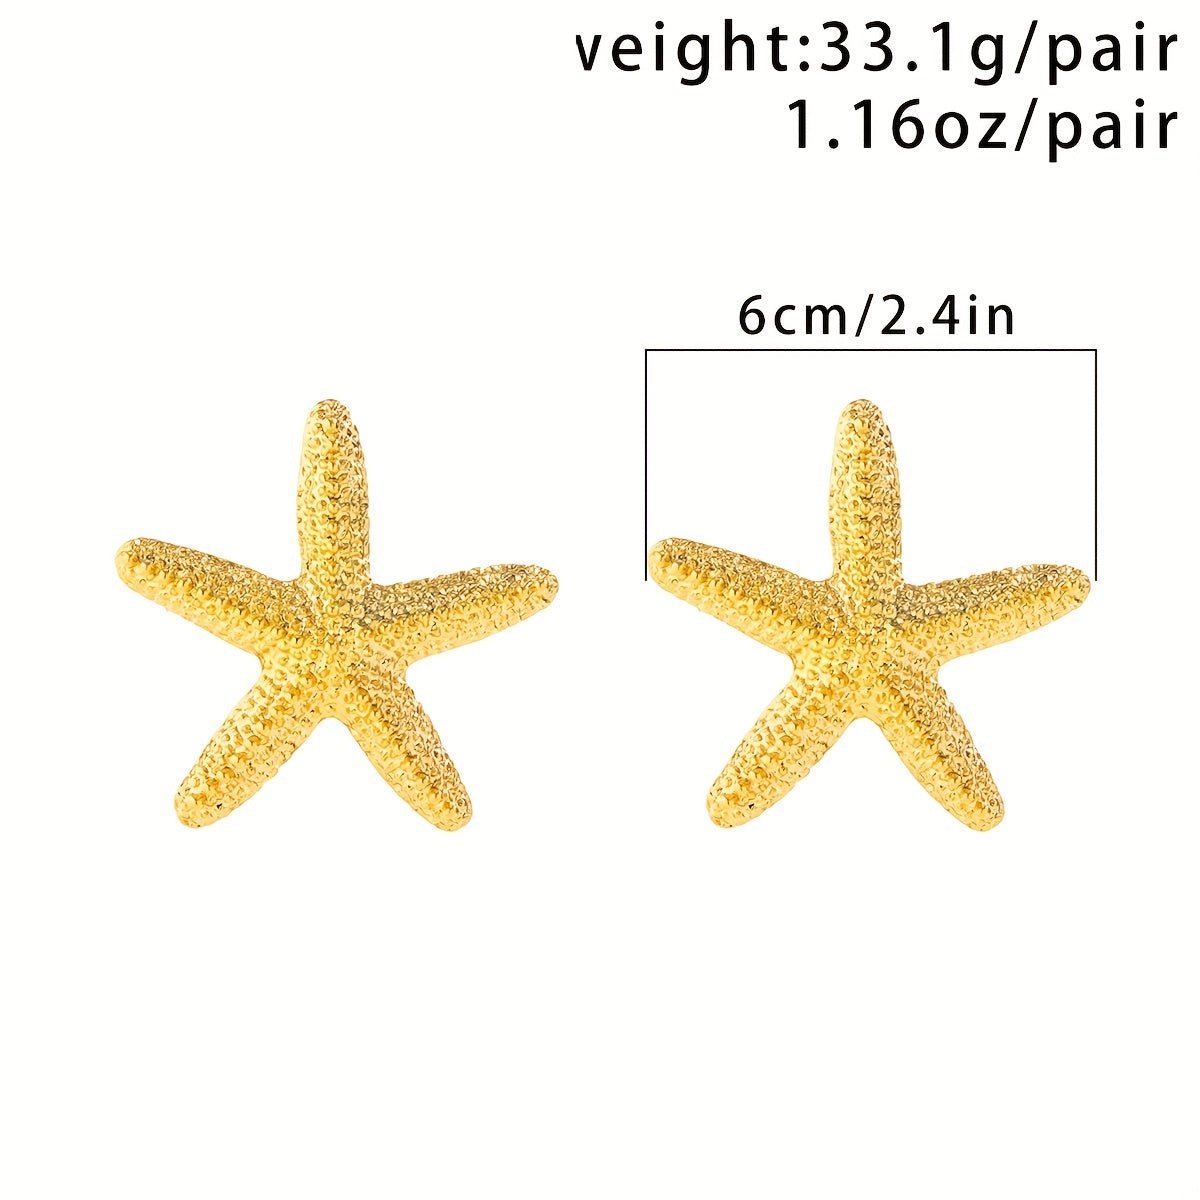 Starfish Stud Earring Retro Dramatic Metal Style Personality Fashion Beach Style Summer Daily Jewelry For Women